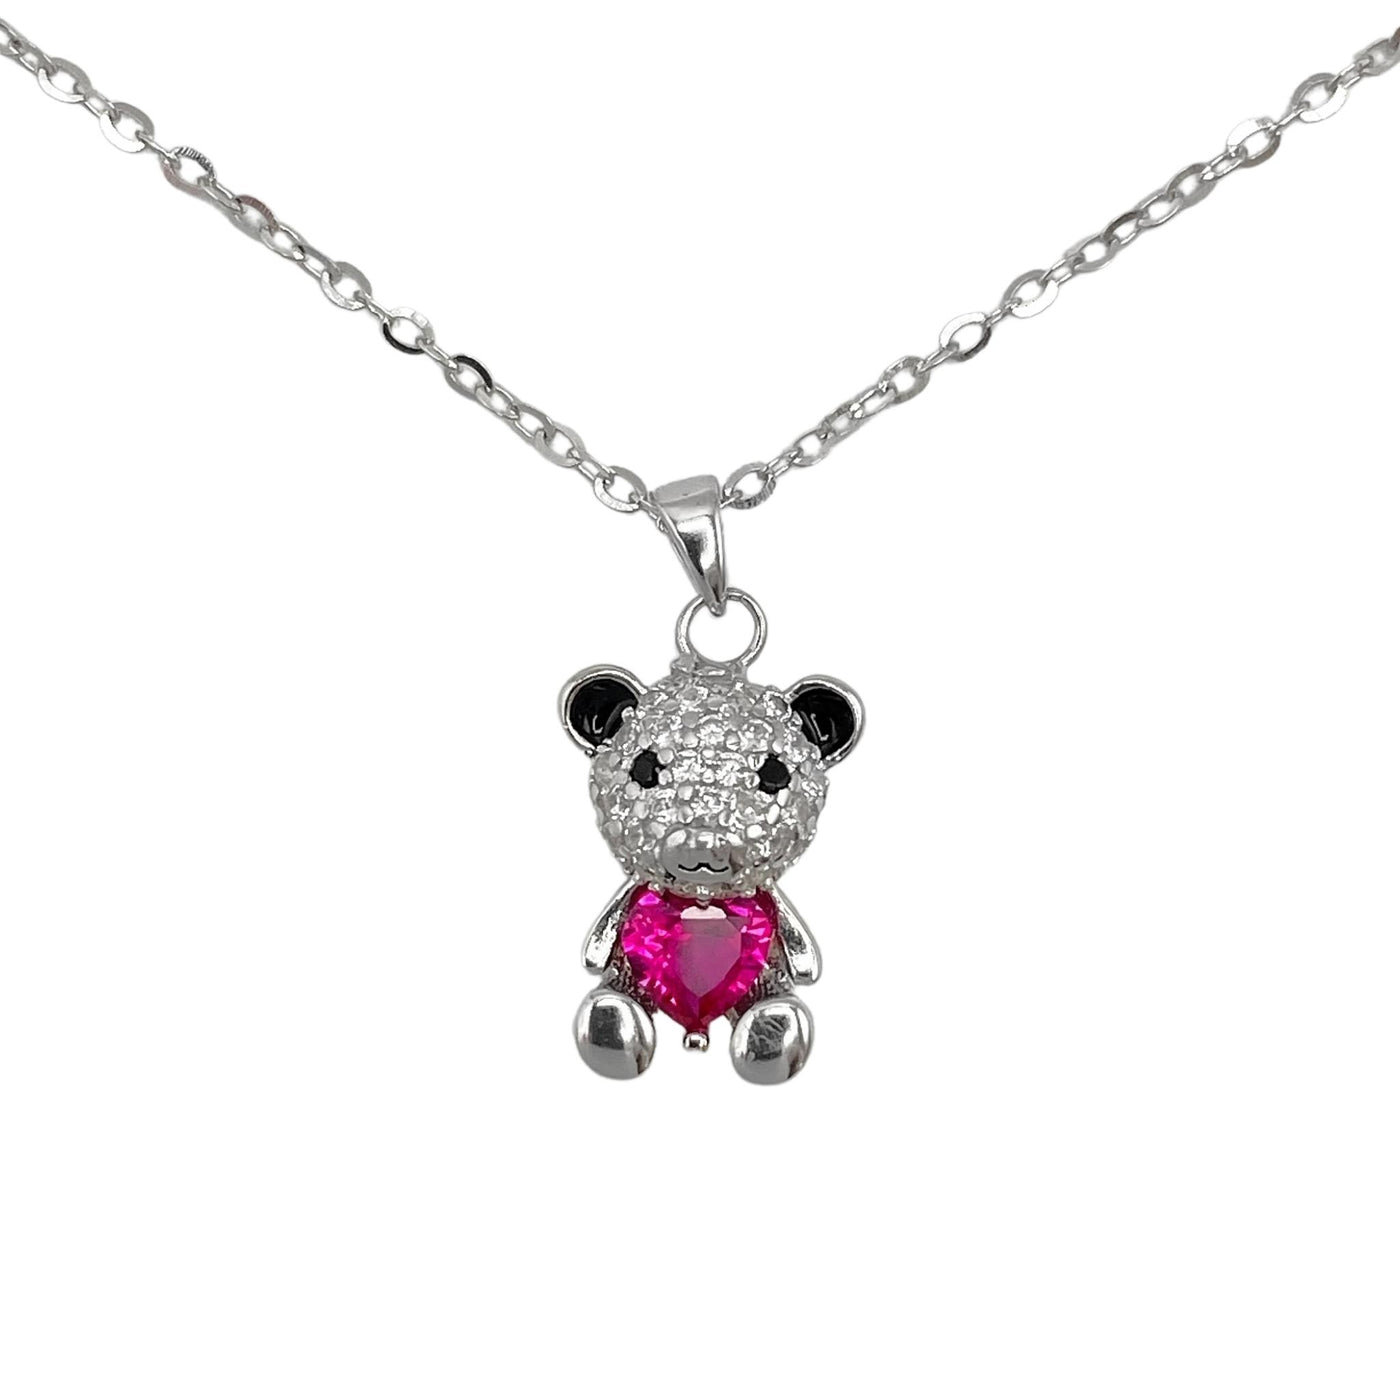 Silver necklace with Bear charm